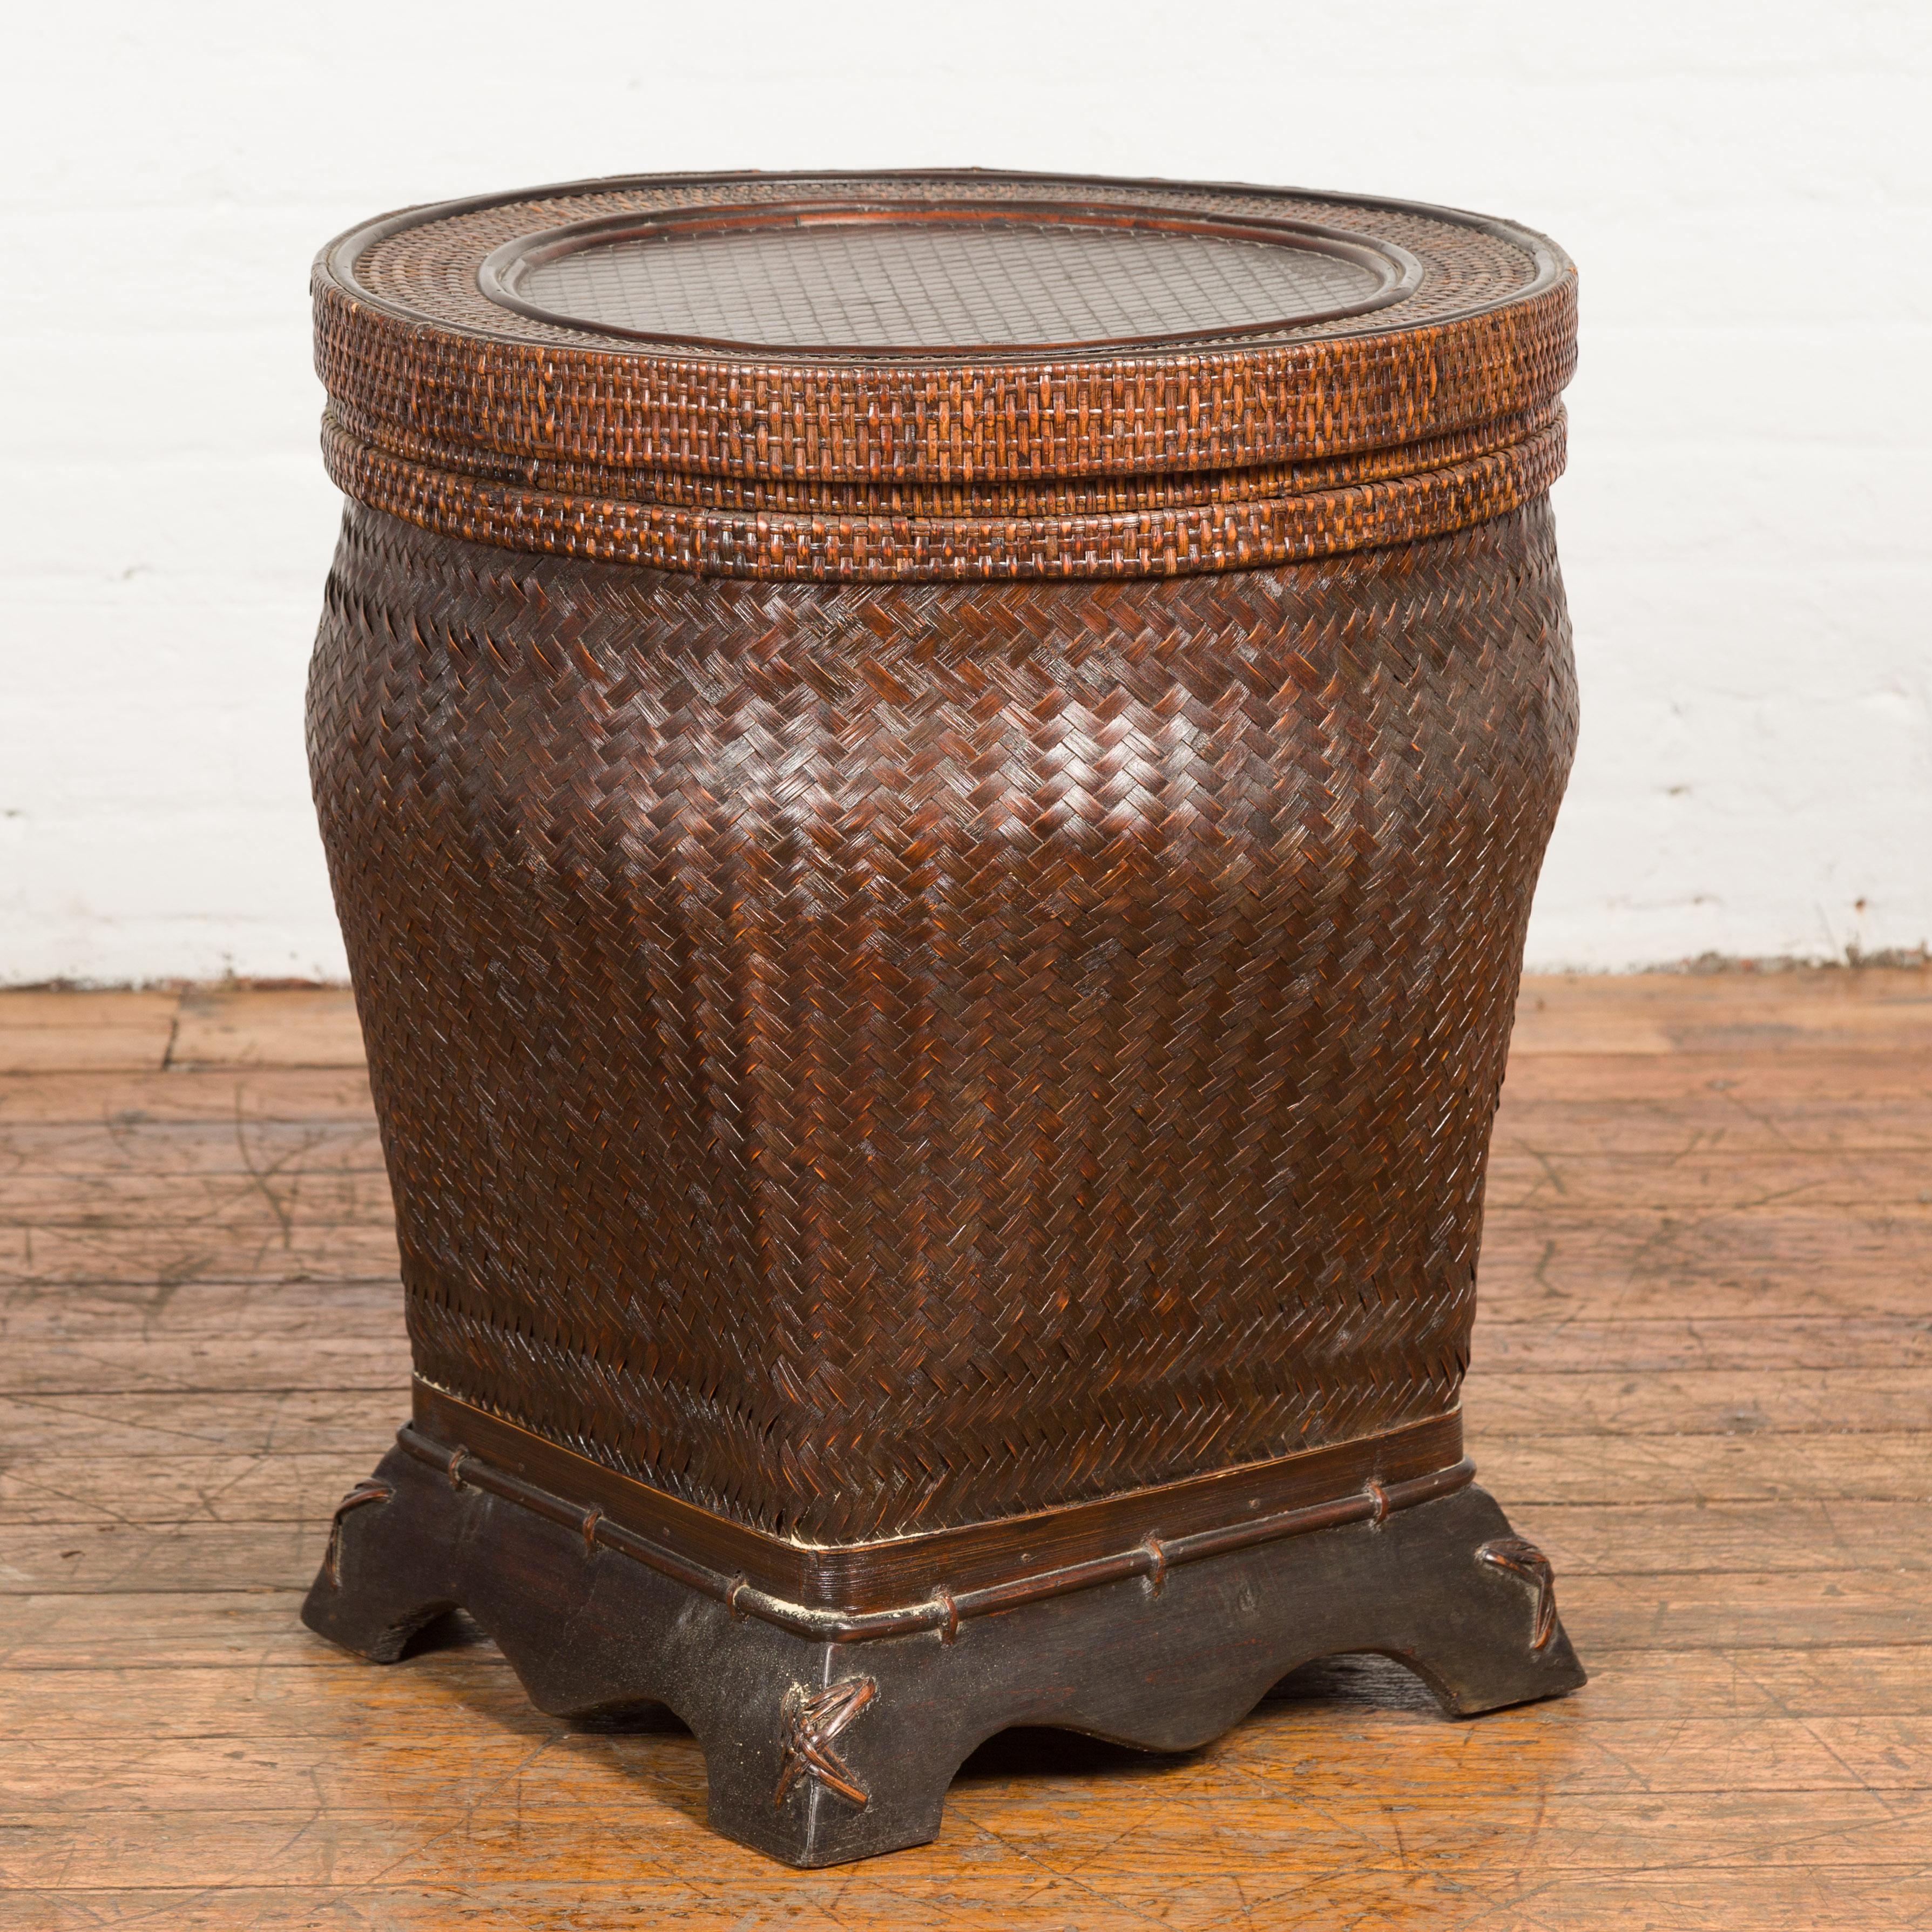 A tall rustic Thai vintage hand-woven rattan and bamboo storage basket from the mid 20th century, with hand-stitched cross motifs, circular lid, wooden scalloped base and dark brown patina. We have more baskets available in similar colors. Created